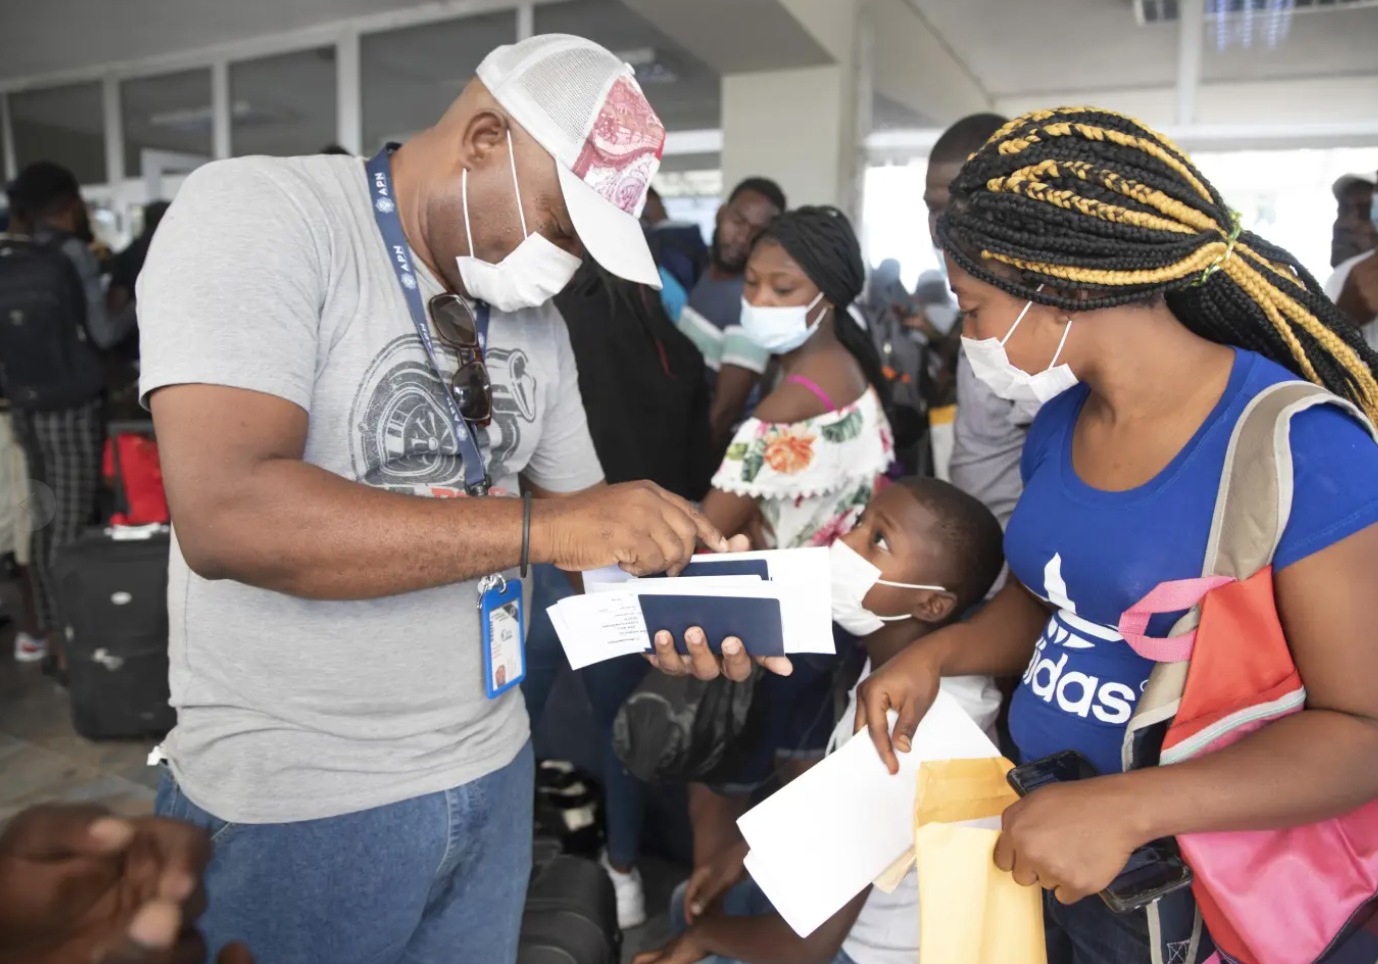 Etienne lienses checks her family's papers for a flight to Chile, at the Toussaint Louverture International Airport, in Port-au-Prince, Haiti, Sunday, Jan. 30, 2022. lienses said she was sent back to Haiti from Texas on Dec. 14 and talked to the AP before flying to Santiago with her three children on a Jan. 30 charter flight on SKY. 